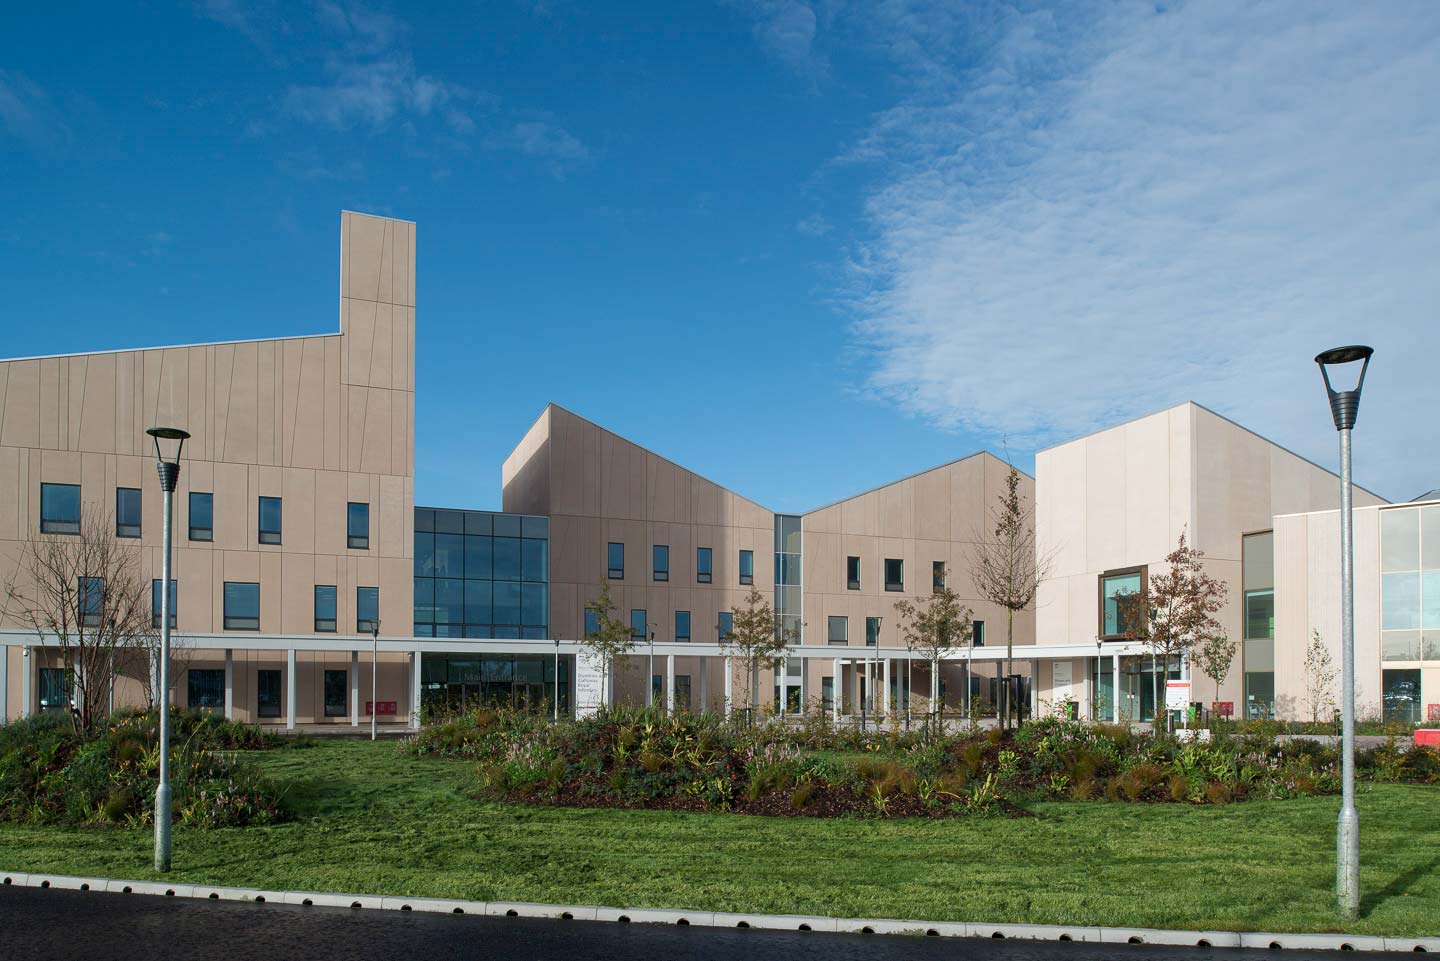 A photograph of the entrance to Dumfries and Galloway hospital - the roof line is made of triangular shapes, and the building is made of light coloured stone. 